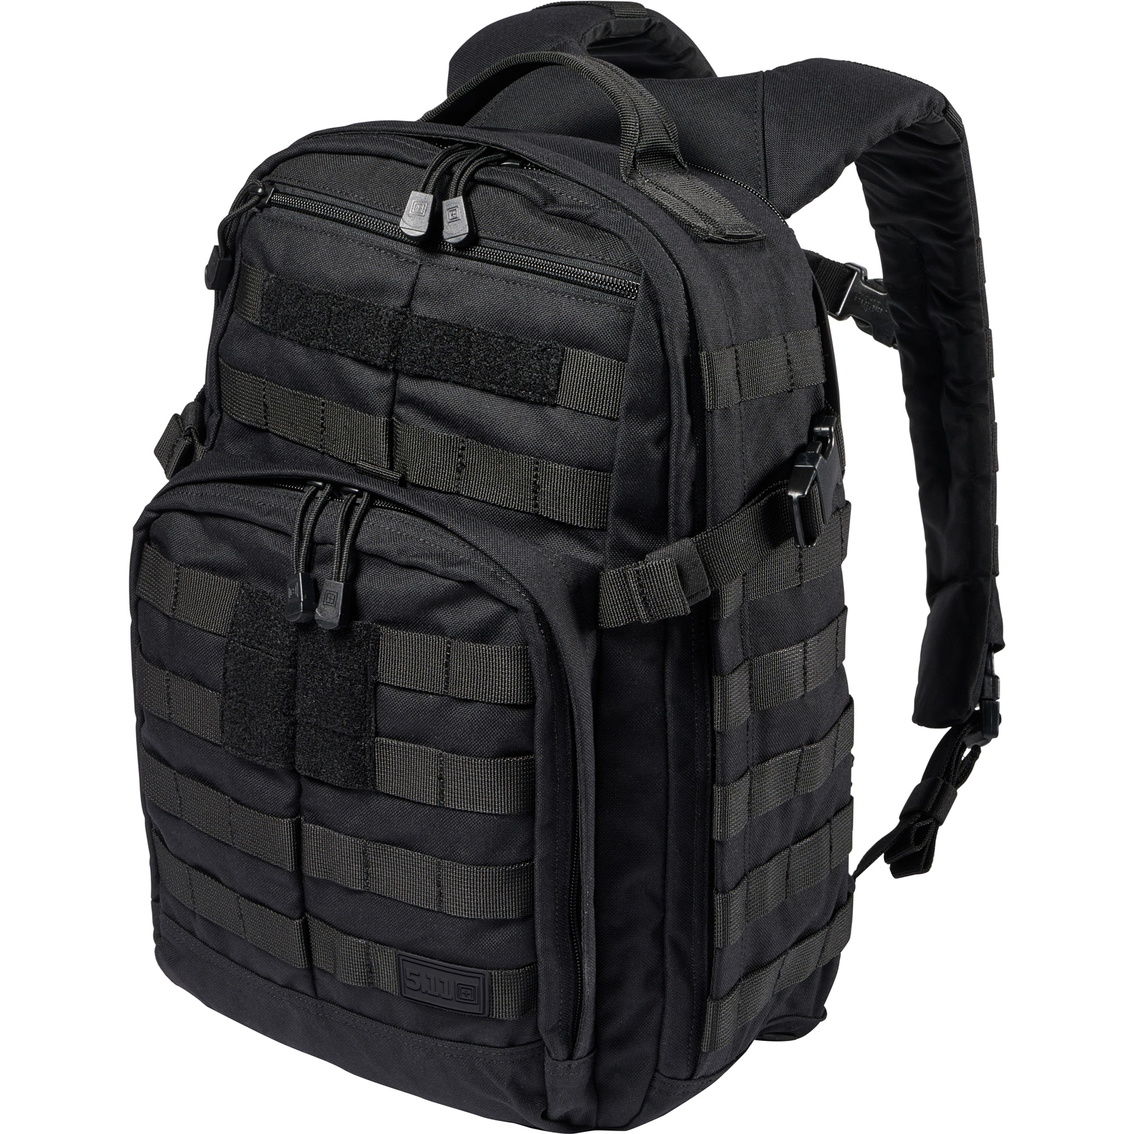 5.11 RUSH 12 2.0 Backpack - Image 4 of 10